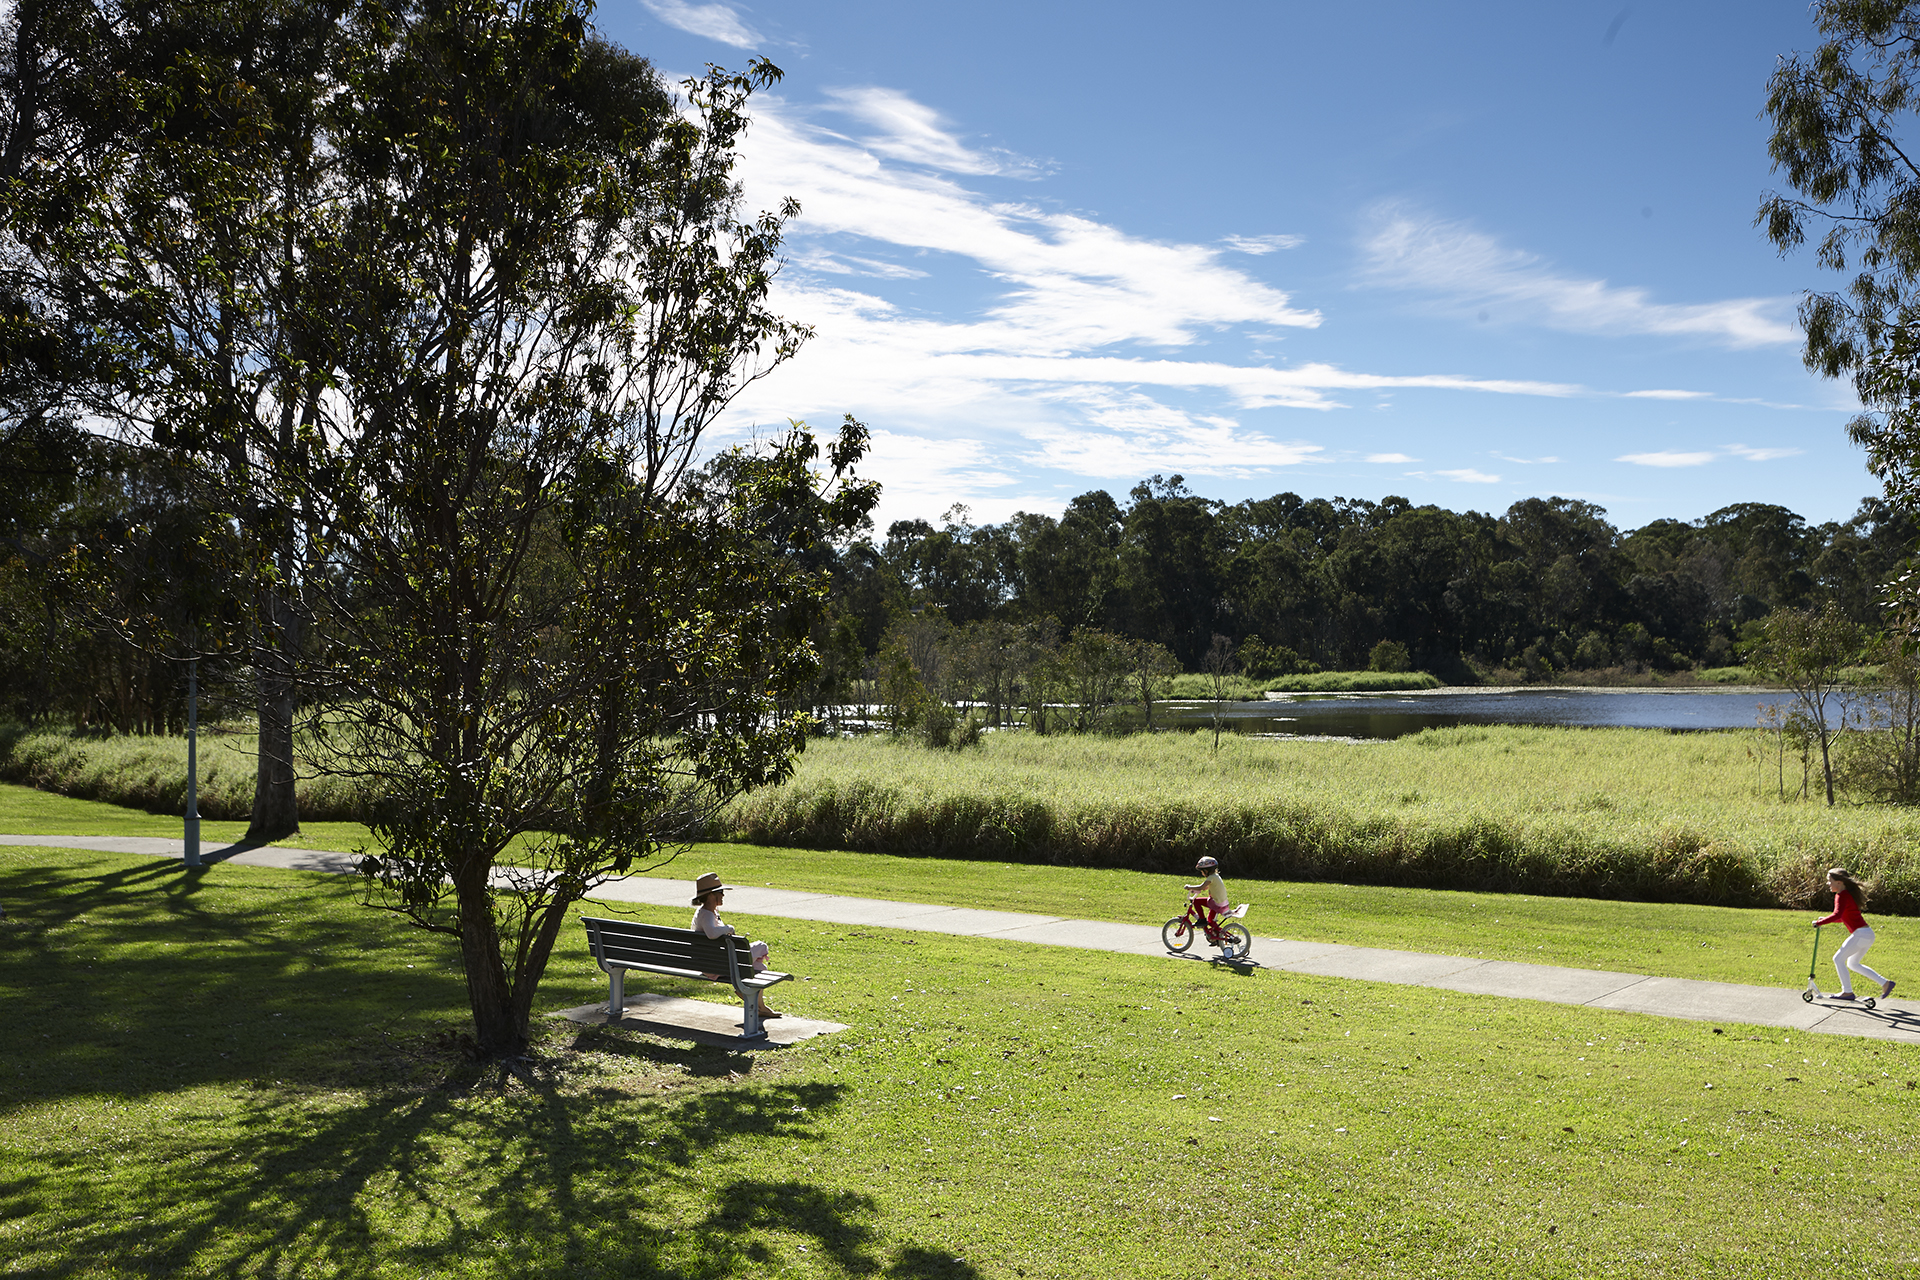 This is an image of the heritage place known as Dowse Lagoon